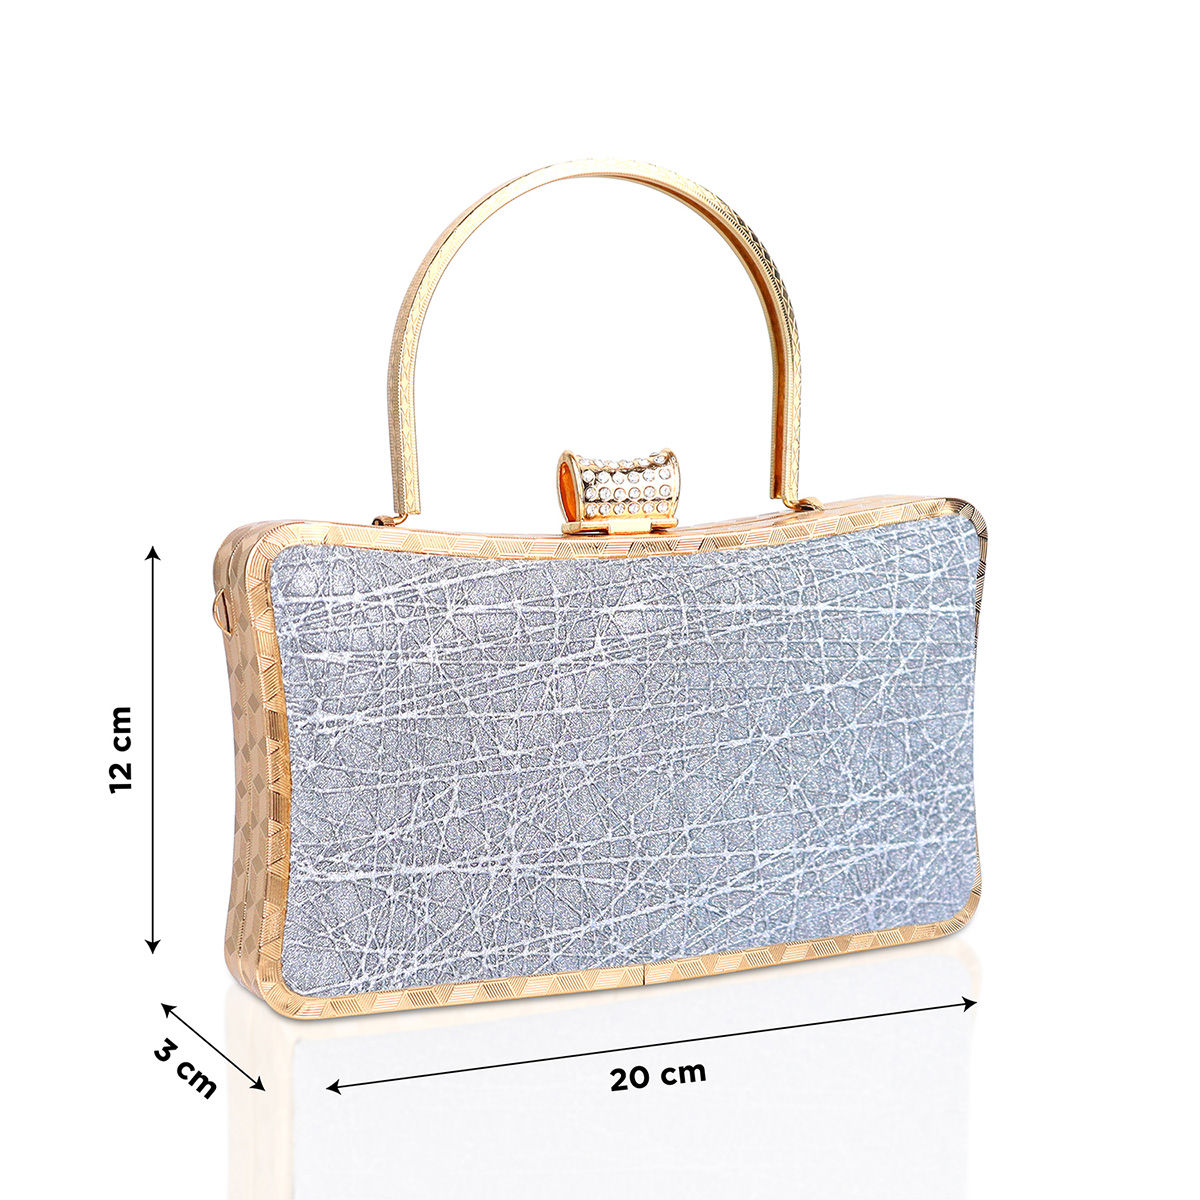 Skb Stylish & Fancy Evening Party Bridal Wedding Clutch Purse for Women  Peach Online in India, Buy at Best Price from Firstcry.com - 13893444